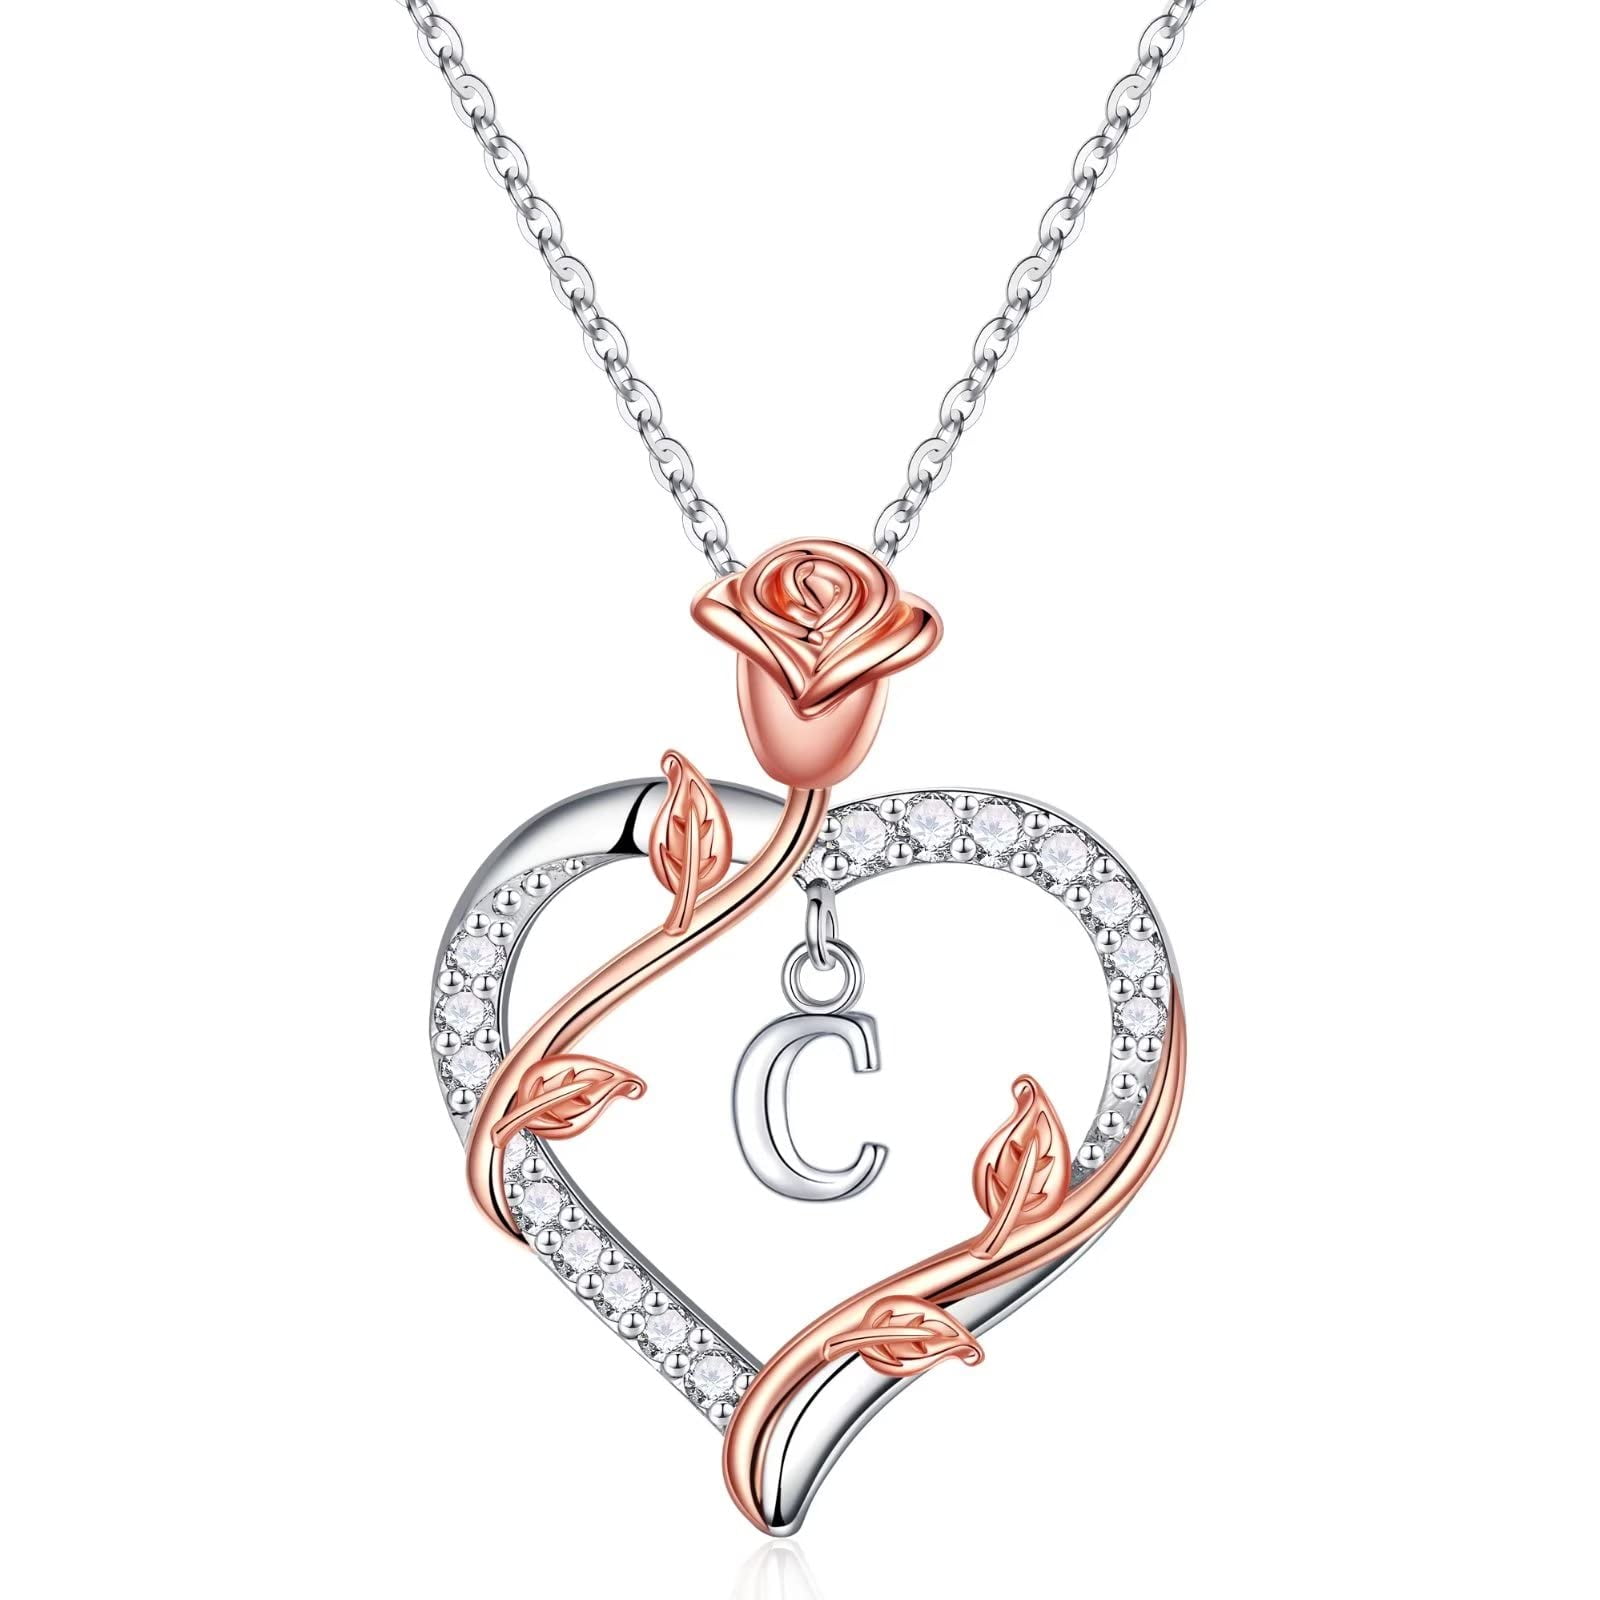 SMILEST Rose Flower Heart Initial Necklace Gifts for Women Girls ...